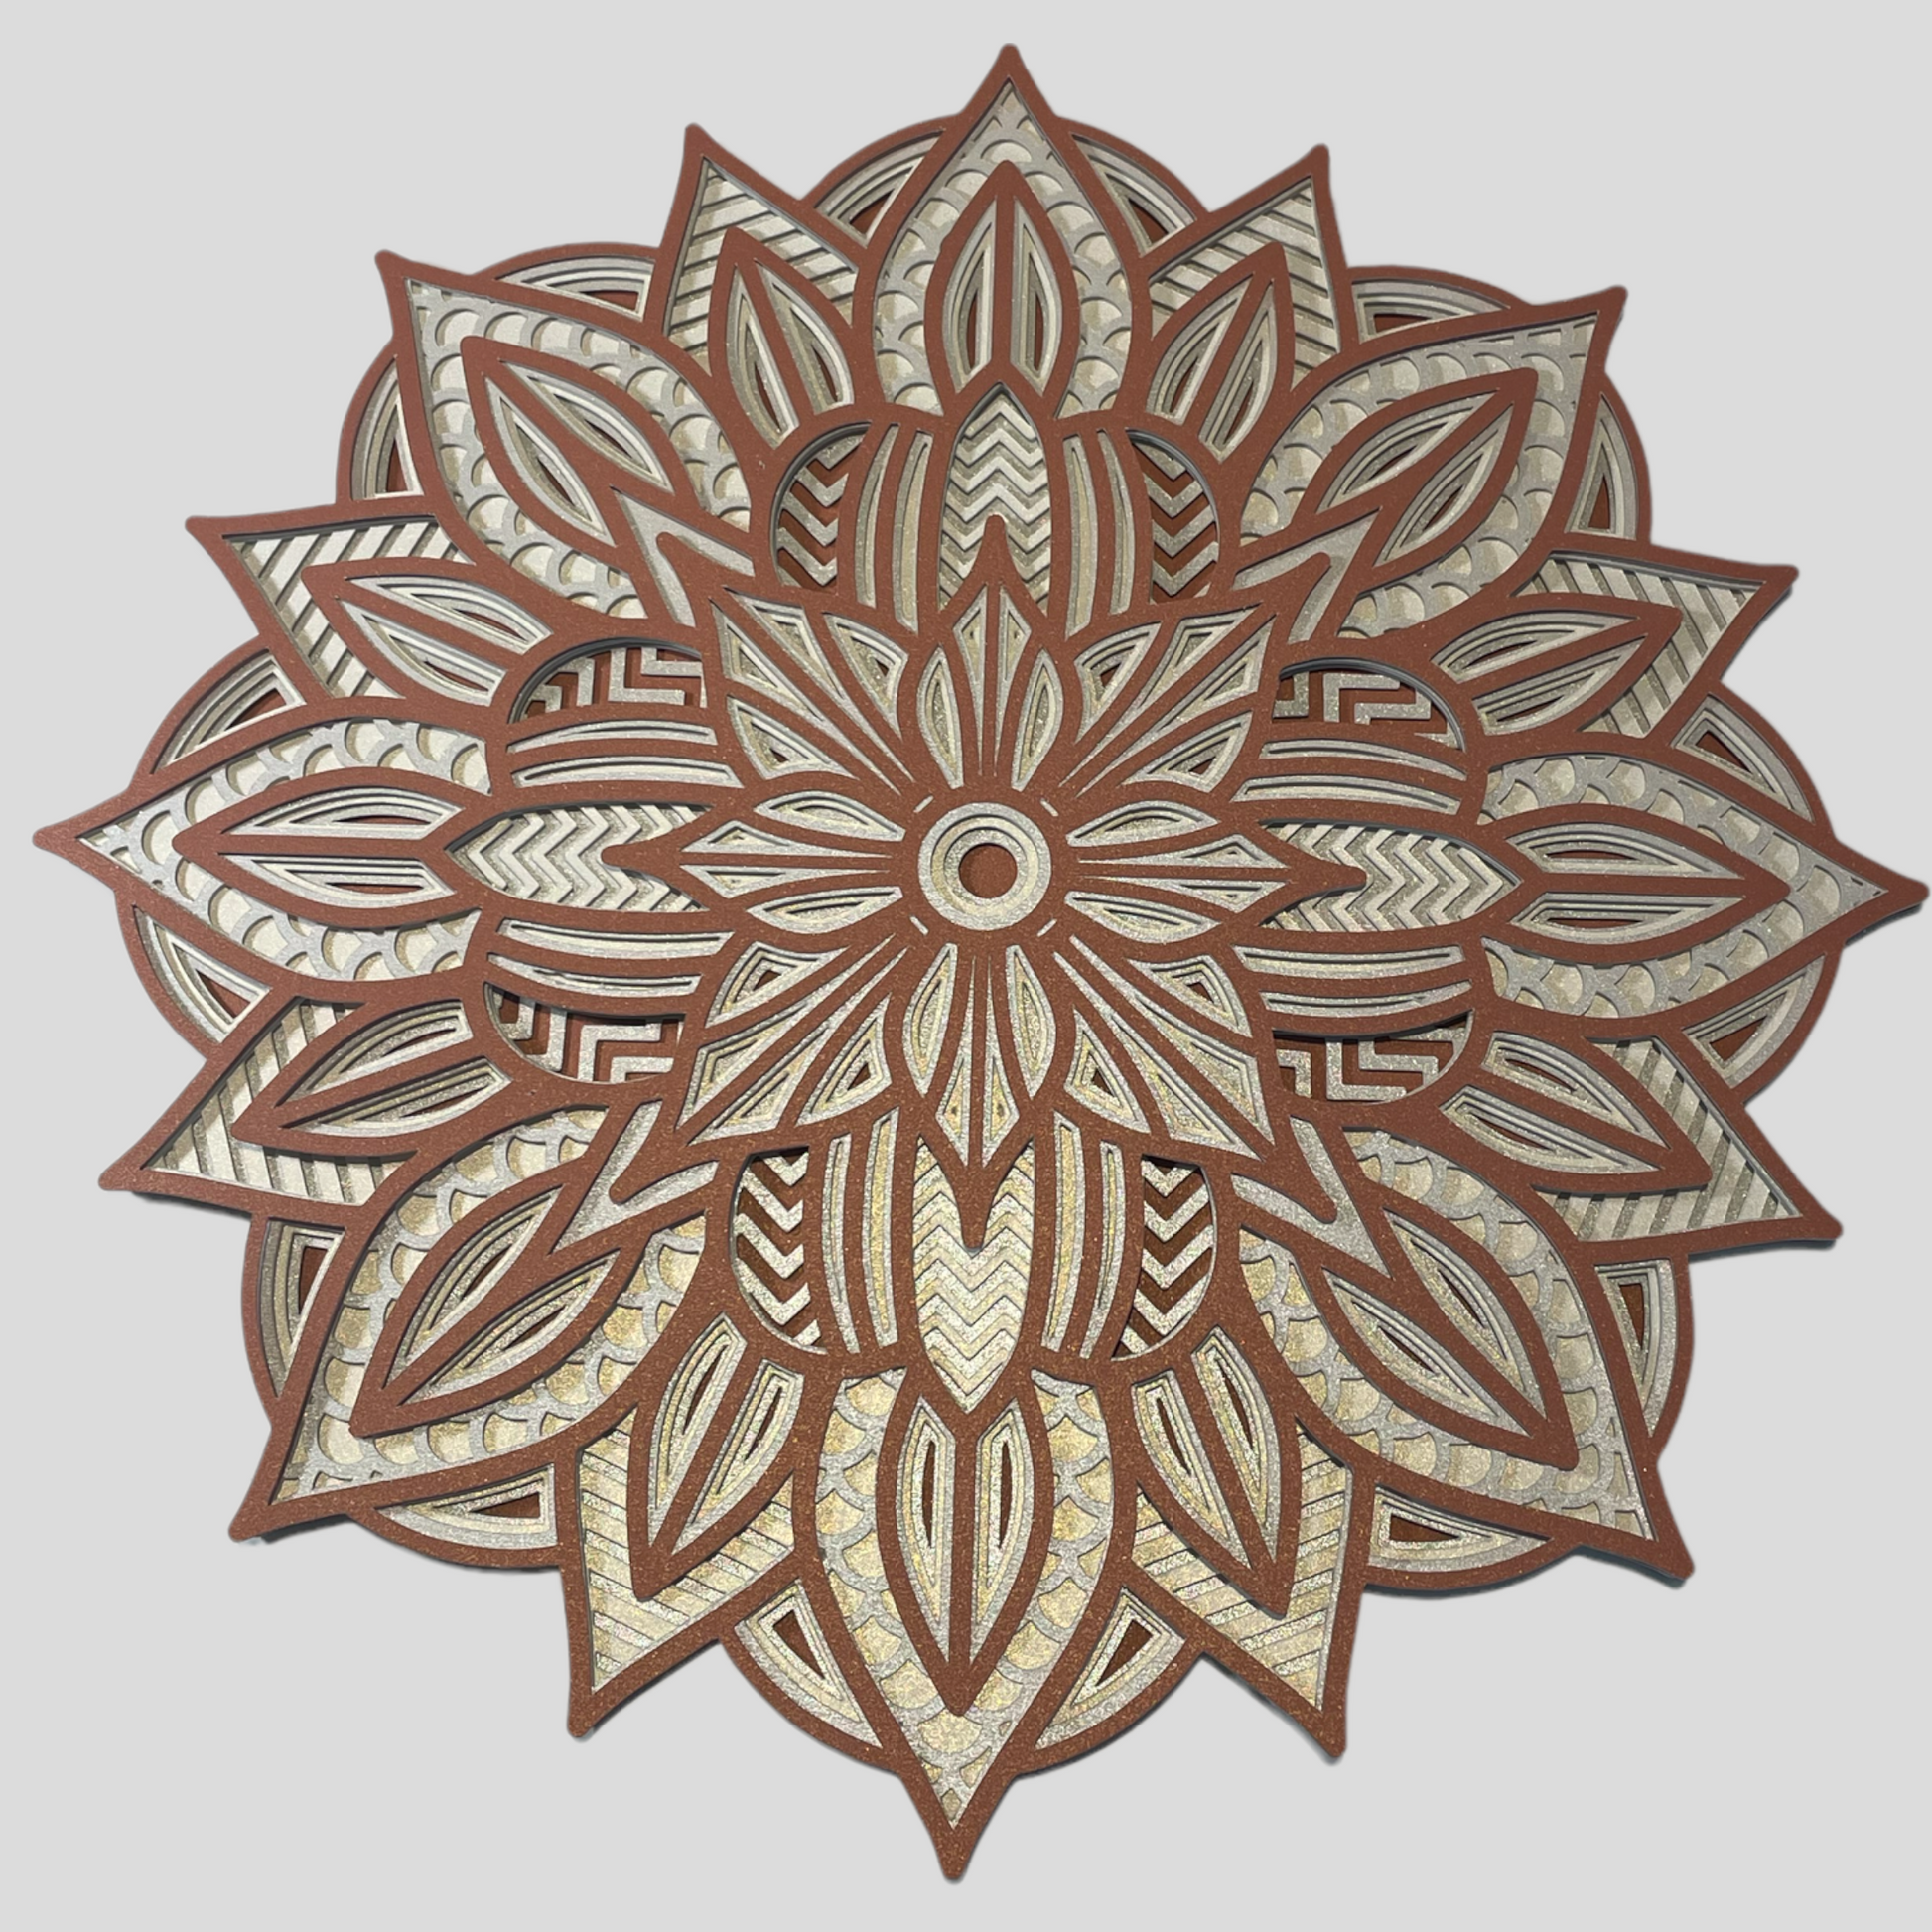 Image showing a 3d Layered Mandala Design which is an instant download SVG design by Home Stitchery Decor.  This 3d Layered Mandala can be cut out with Cricut, Silhouette, CNC or laser machines.  Create your own one-of-a-kind 3d Layered Mandala by following along with the complete tutorial on the Home Stitchery Decor YouTube Channel